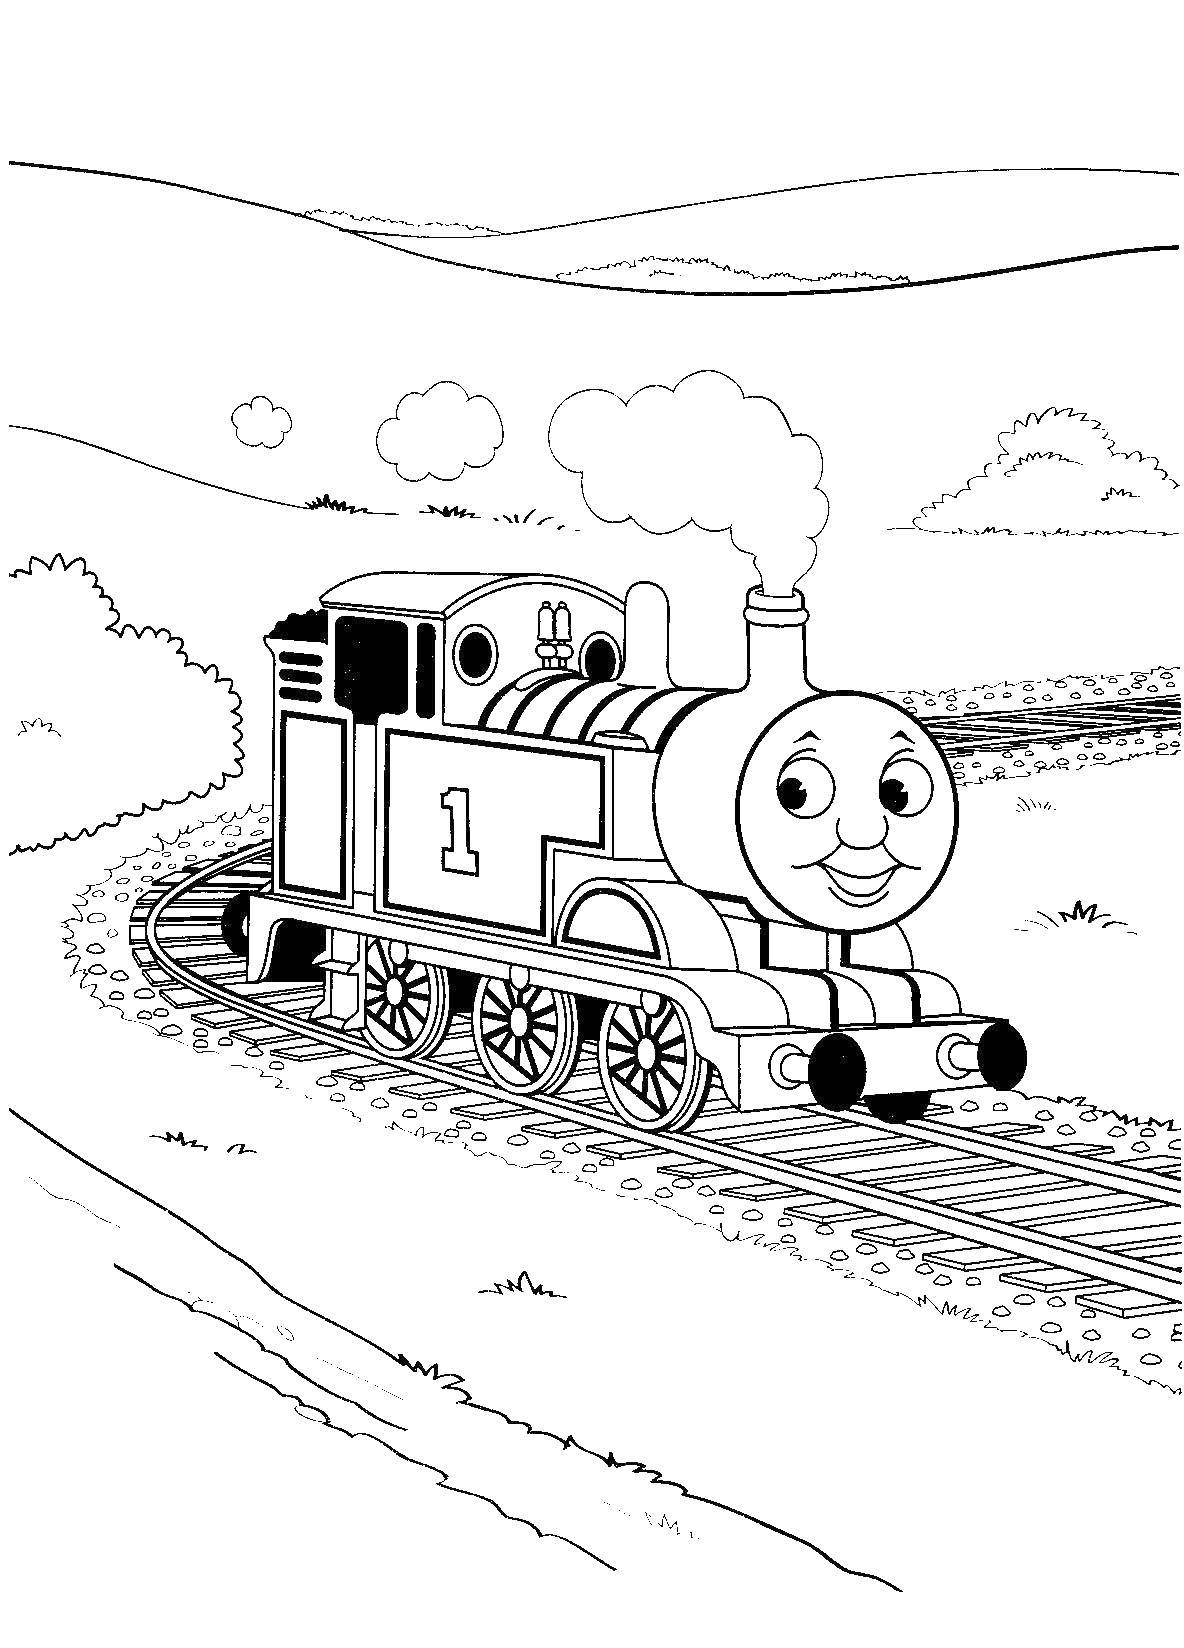 Coloring Cute Thomas the tank engine. Category train. Tags:  Cartoon character.